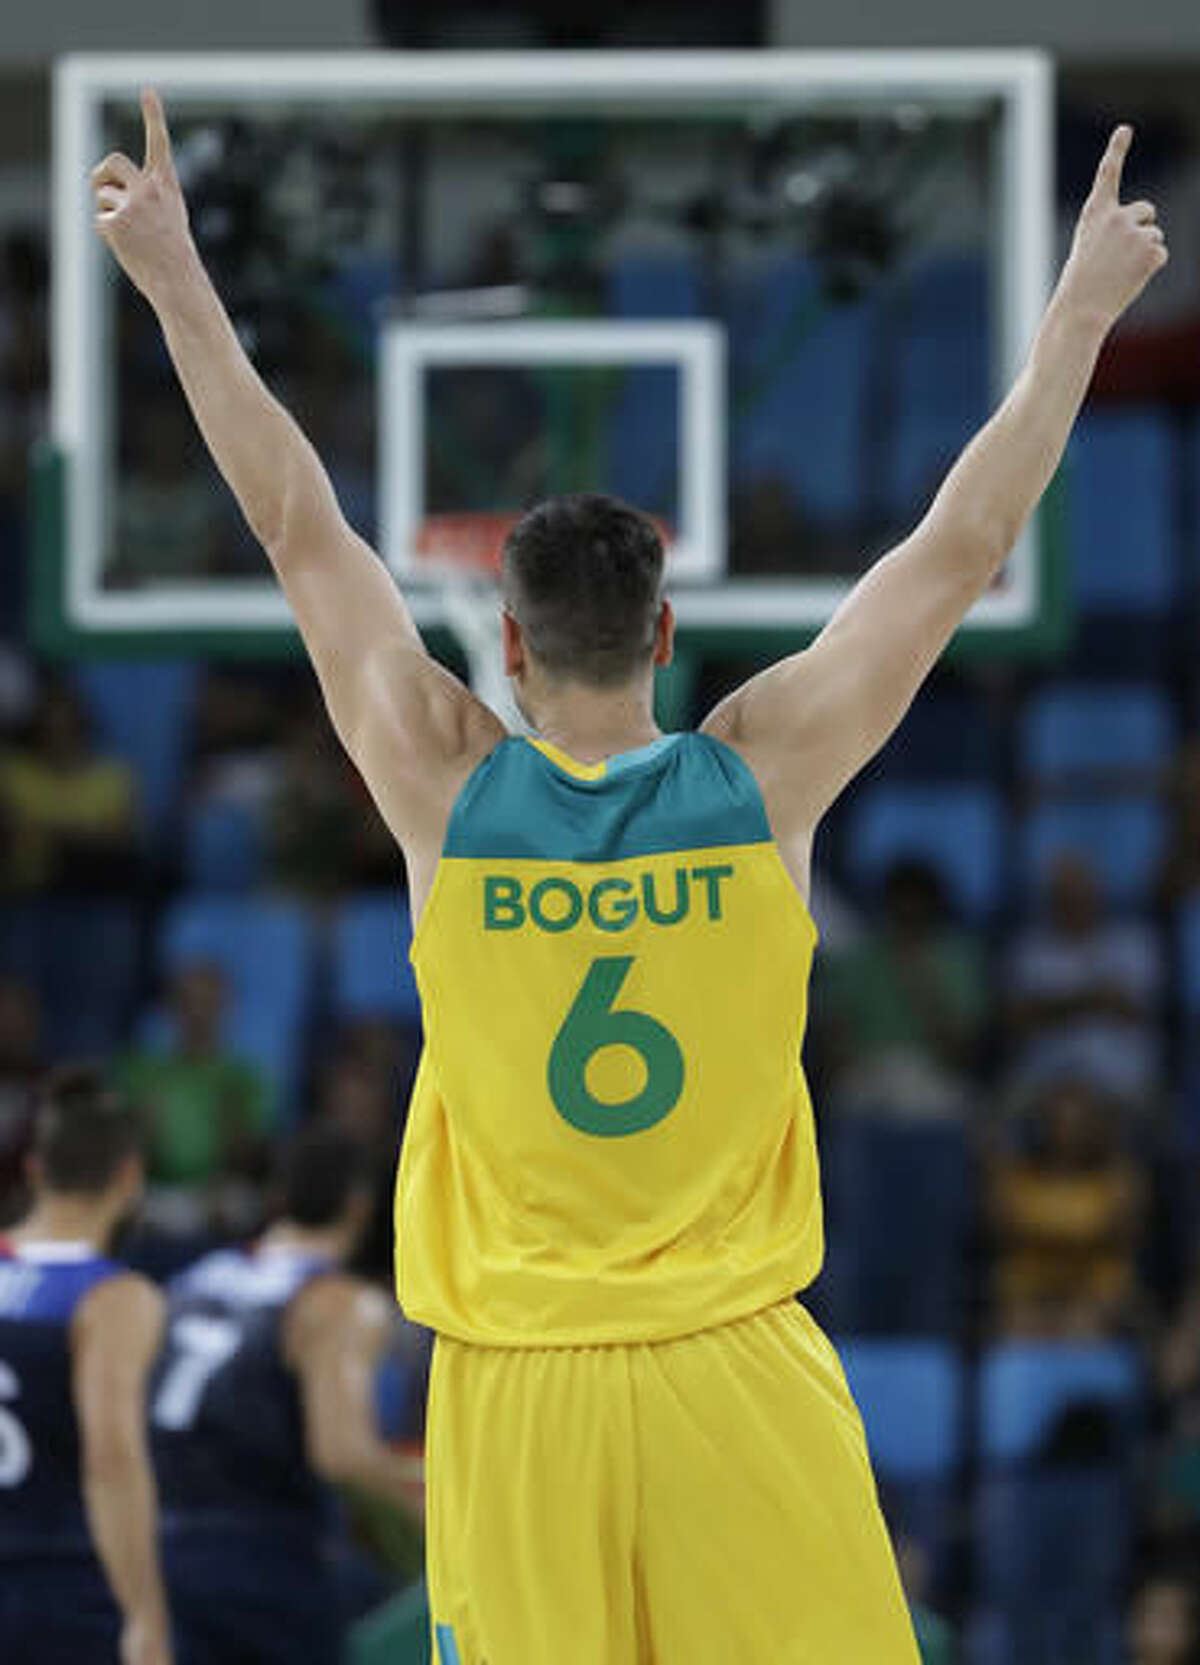 Australia's Andrew Bogut (6) celebrates a teammates score during a men's basketball game against France at the 2016 Summer Olympics in Rio de Janeiro, Brazil, Saturday, Aug. 6, 2016. (AP Photo/Eric Gay)